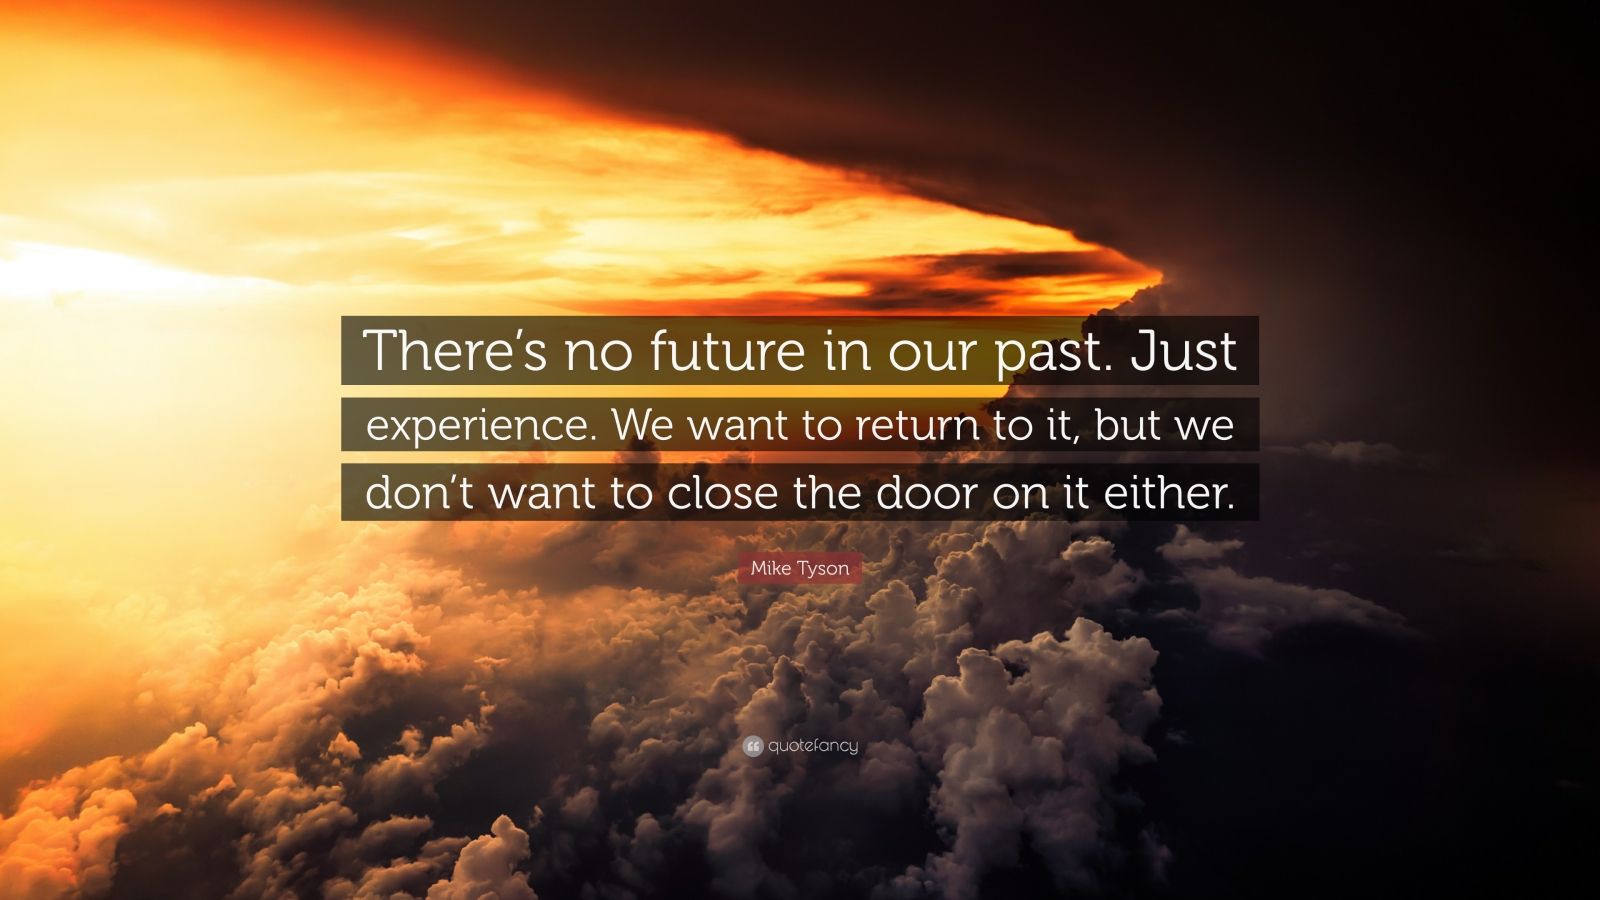 Mike Tyson Quote: “There’s no future in our past. Just experience. We ...